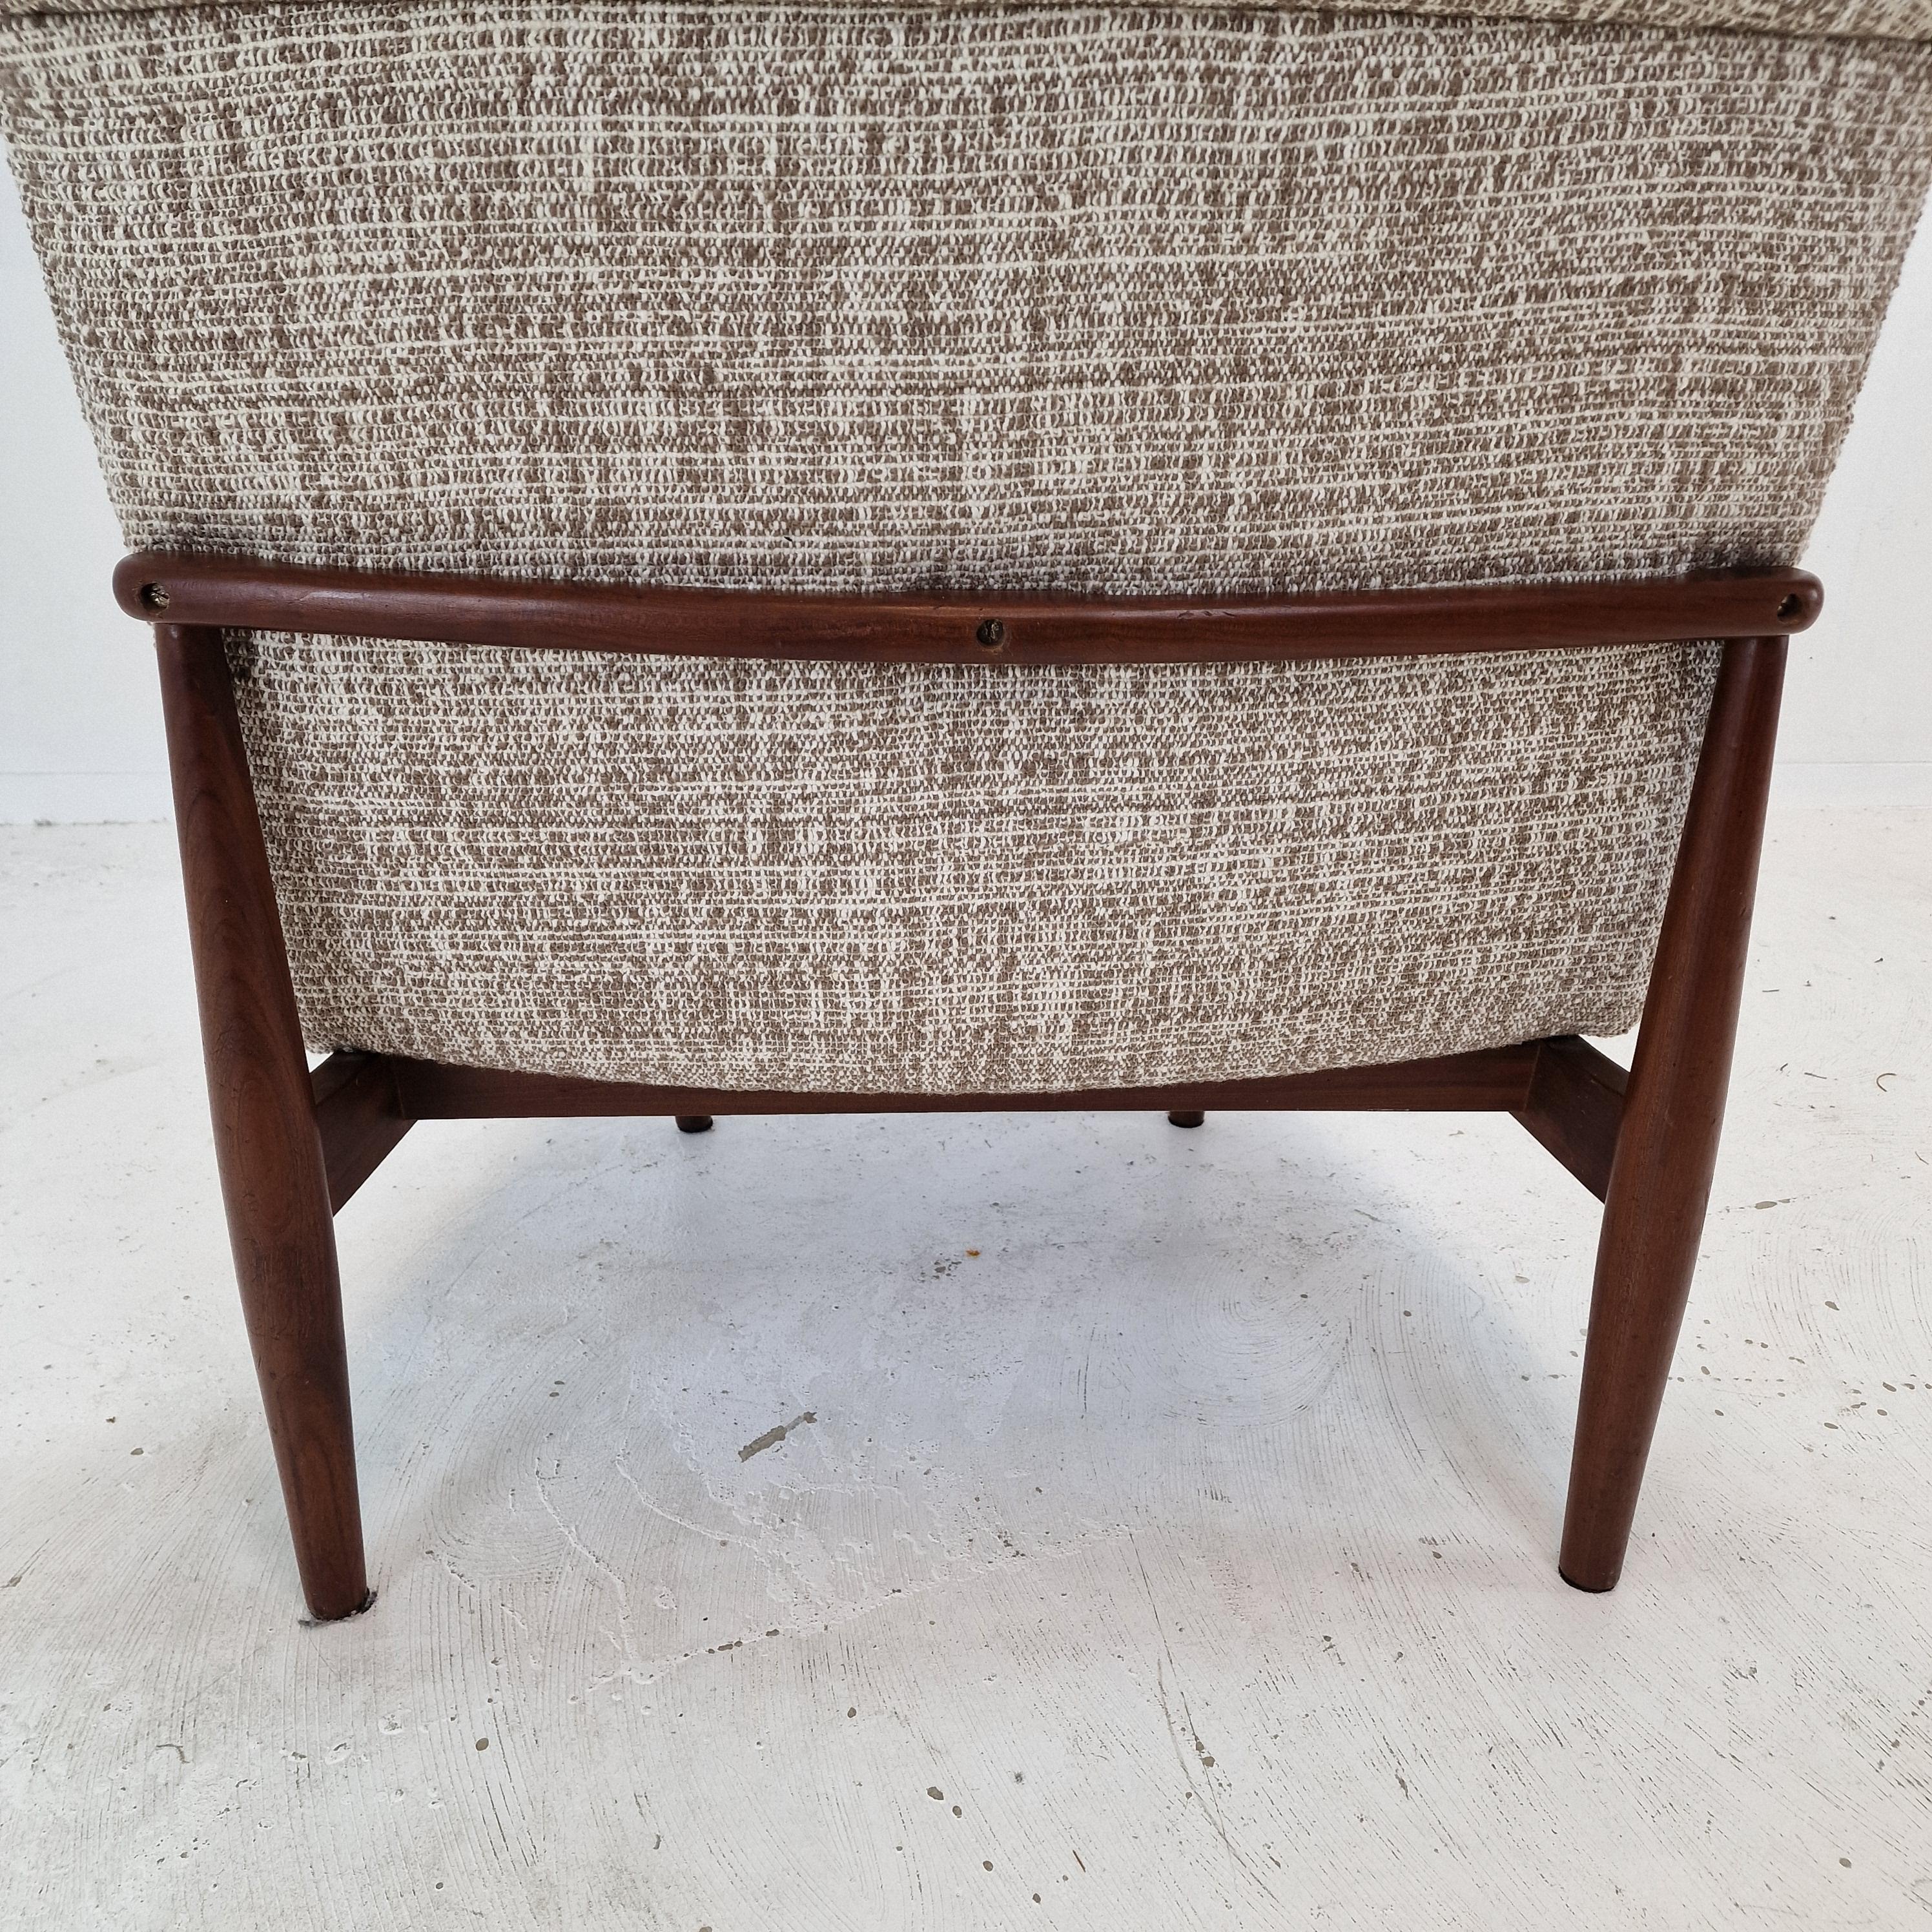 Midcentury Round Bench of 4 Teak Chairs, Denmark, 1960s For Sale 9